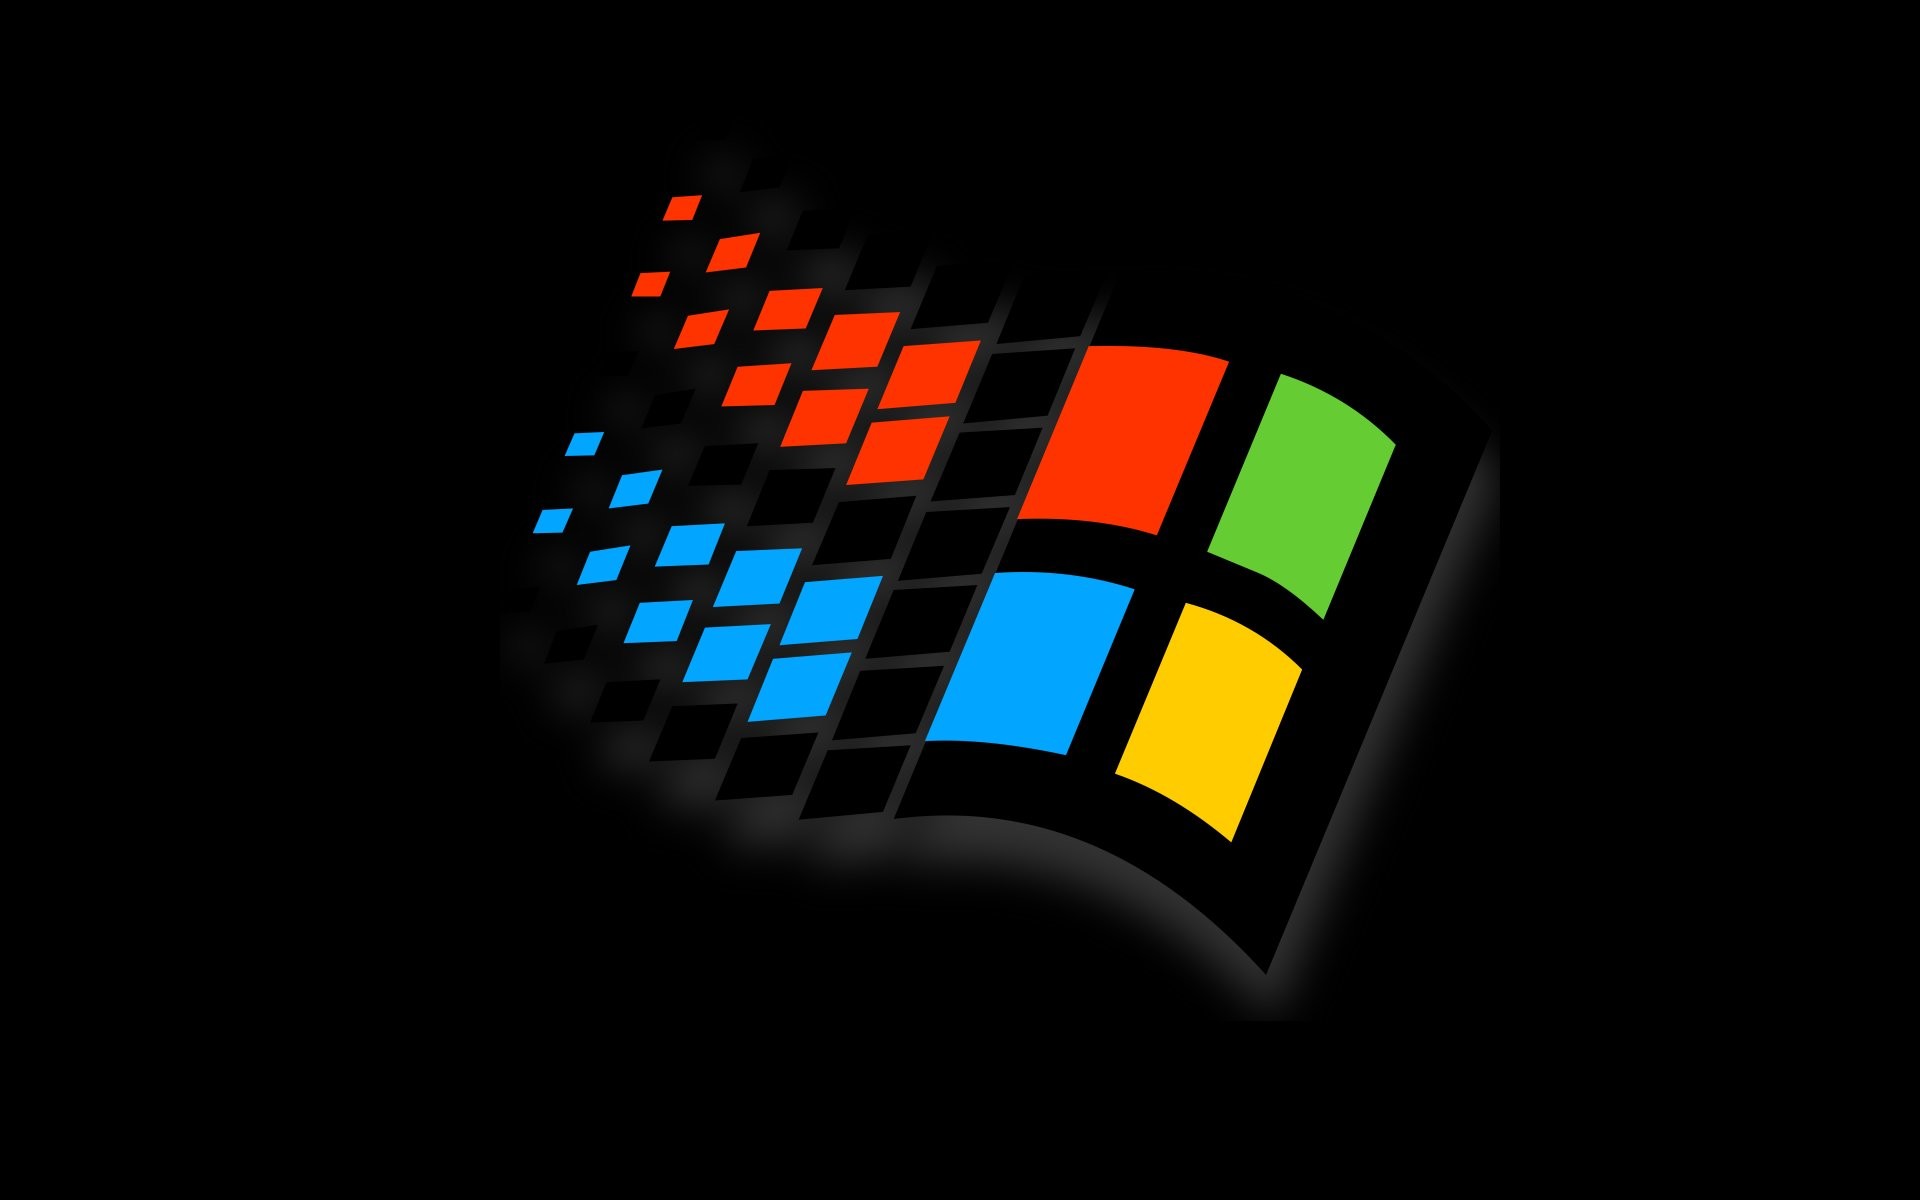 1920x1200 Windows 98 Wallpaper | Technology News and Product Reviews